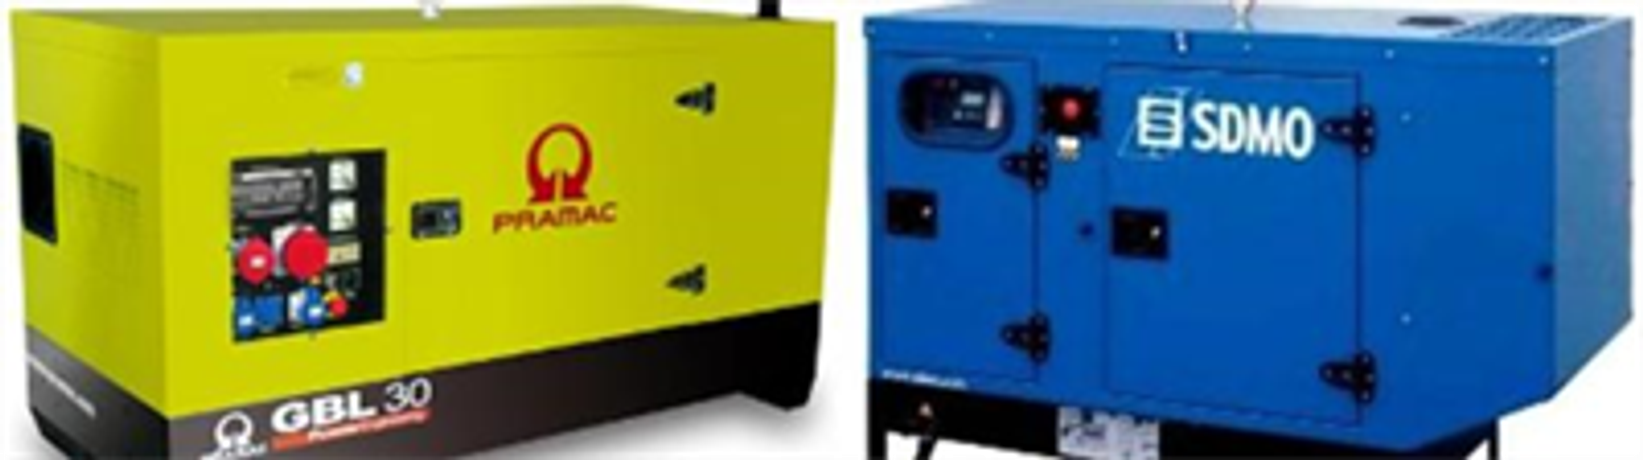 SDMO and Pramac - Self Contained Off-Grid Generators